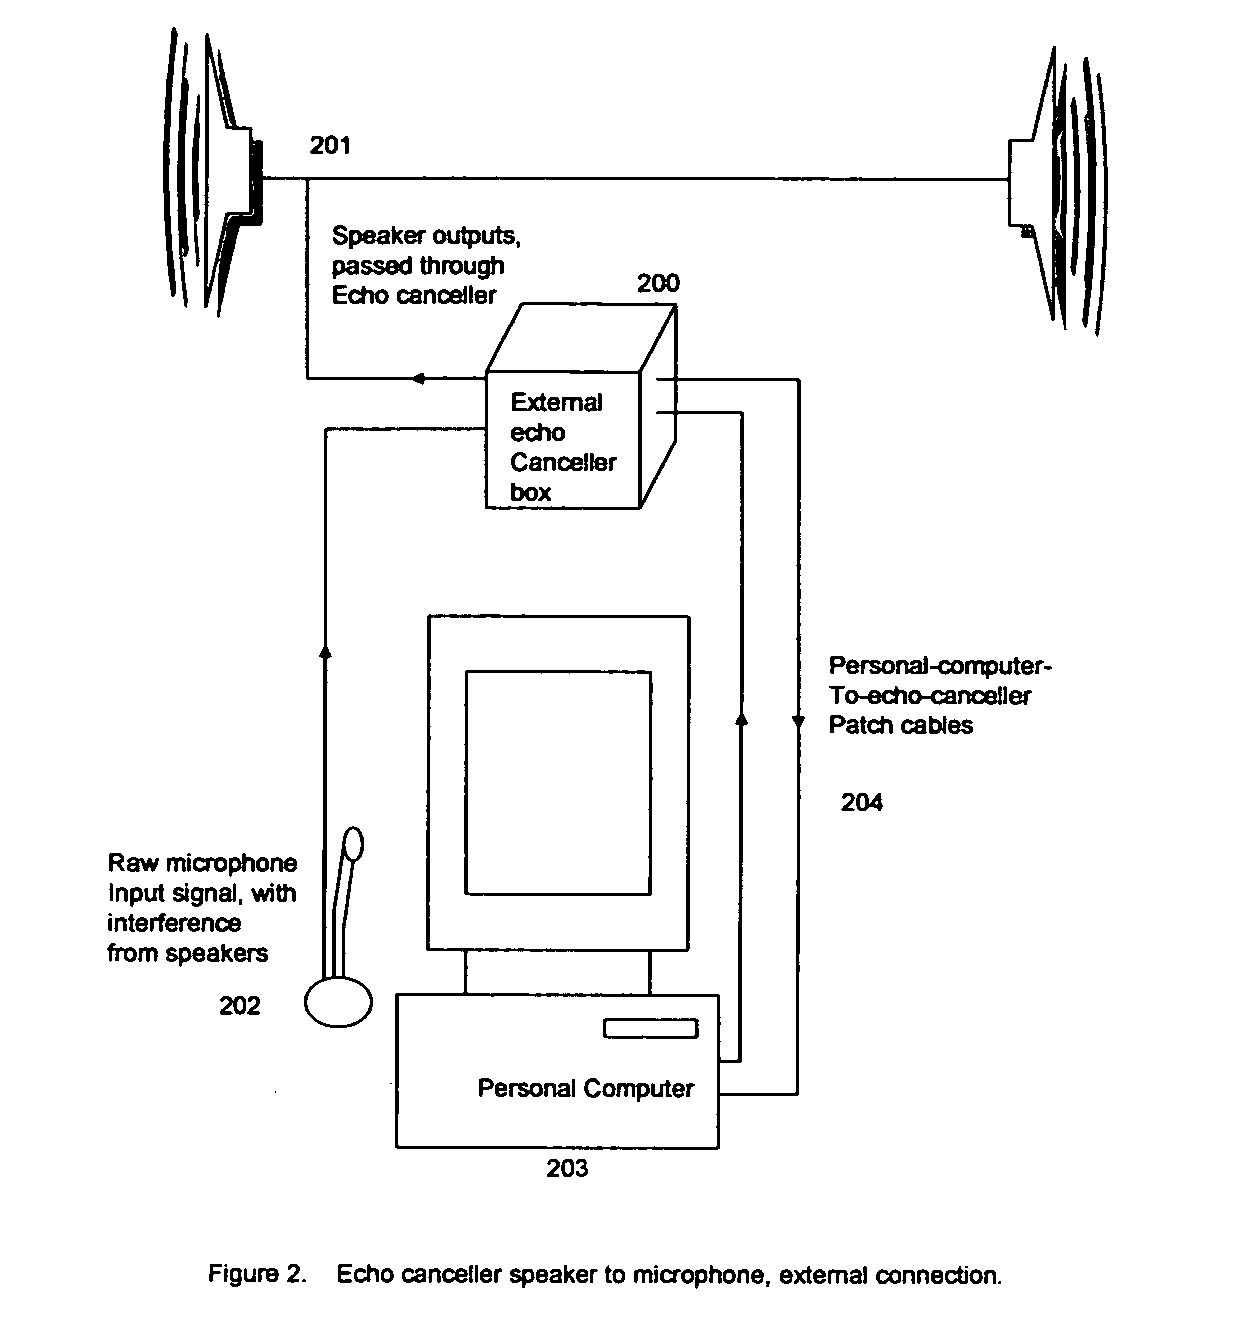 Echo canceller for removing speaker to microphone feedback on a personal computer